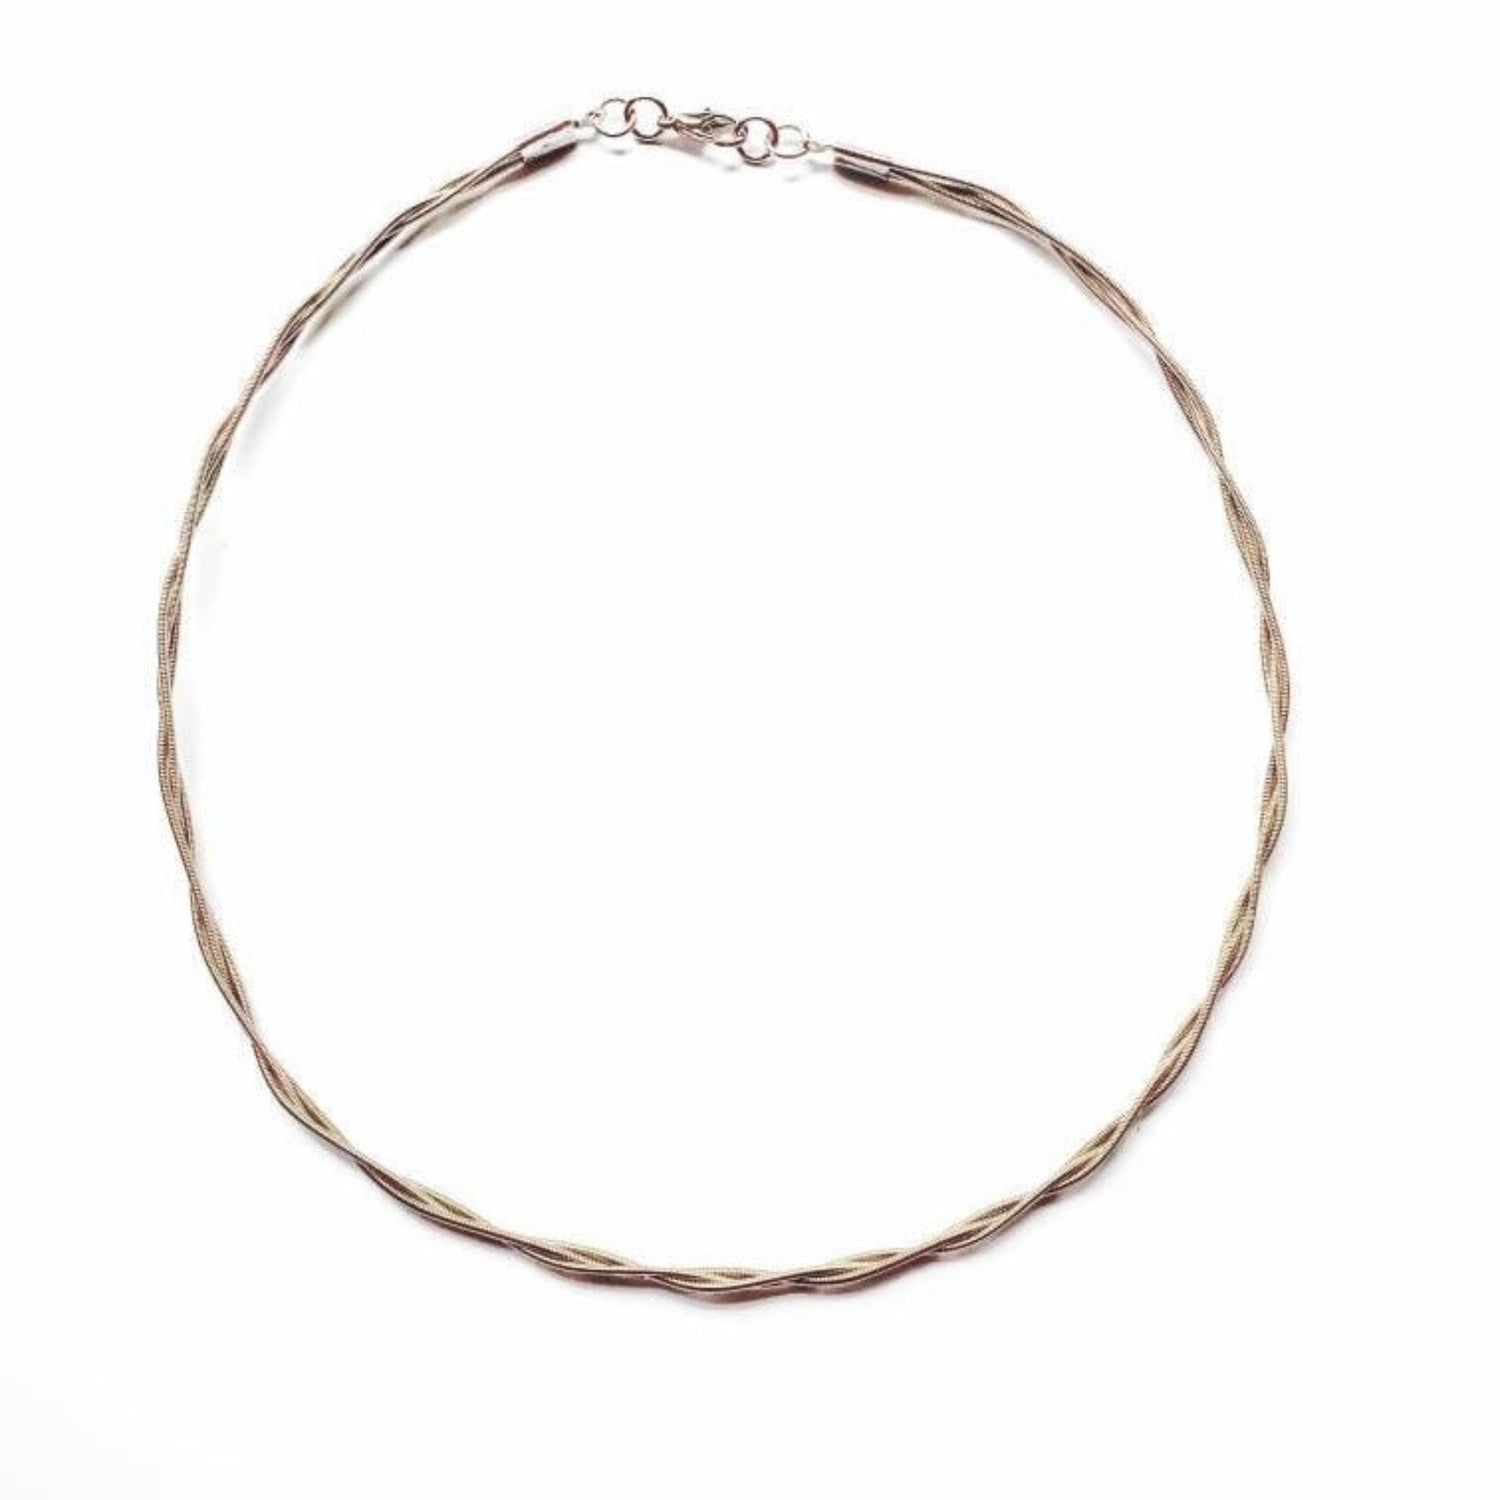 a silver chain style necklace from from braided guitar strings